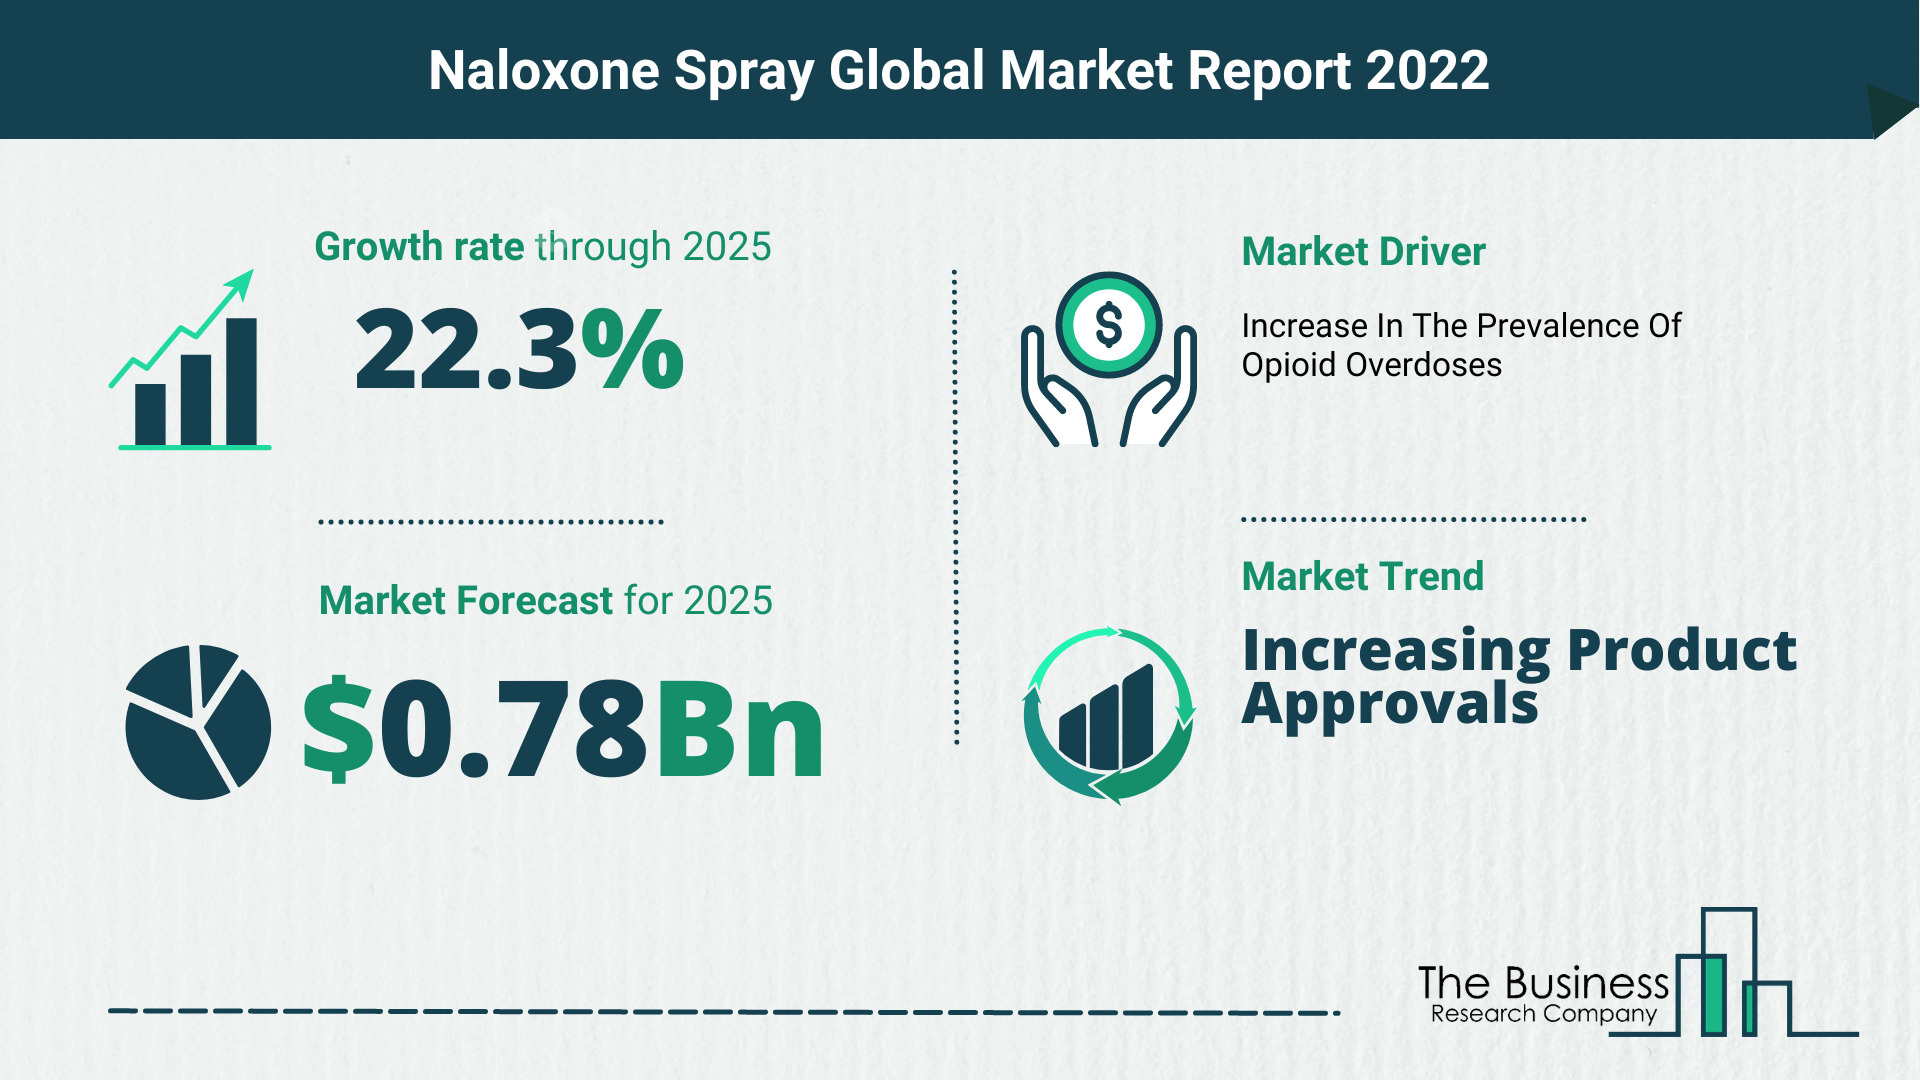 What Is The Naloxone Spray Market Overview In 2022?